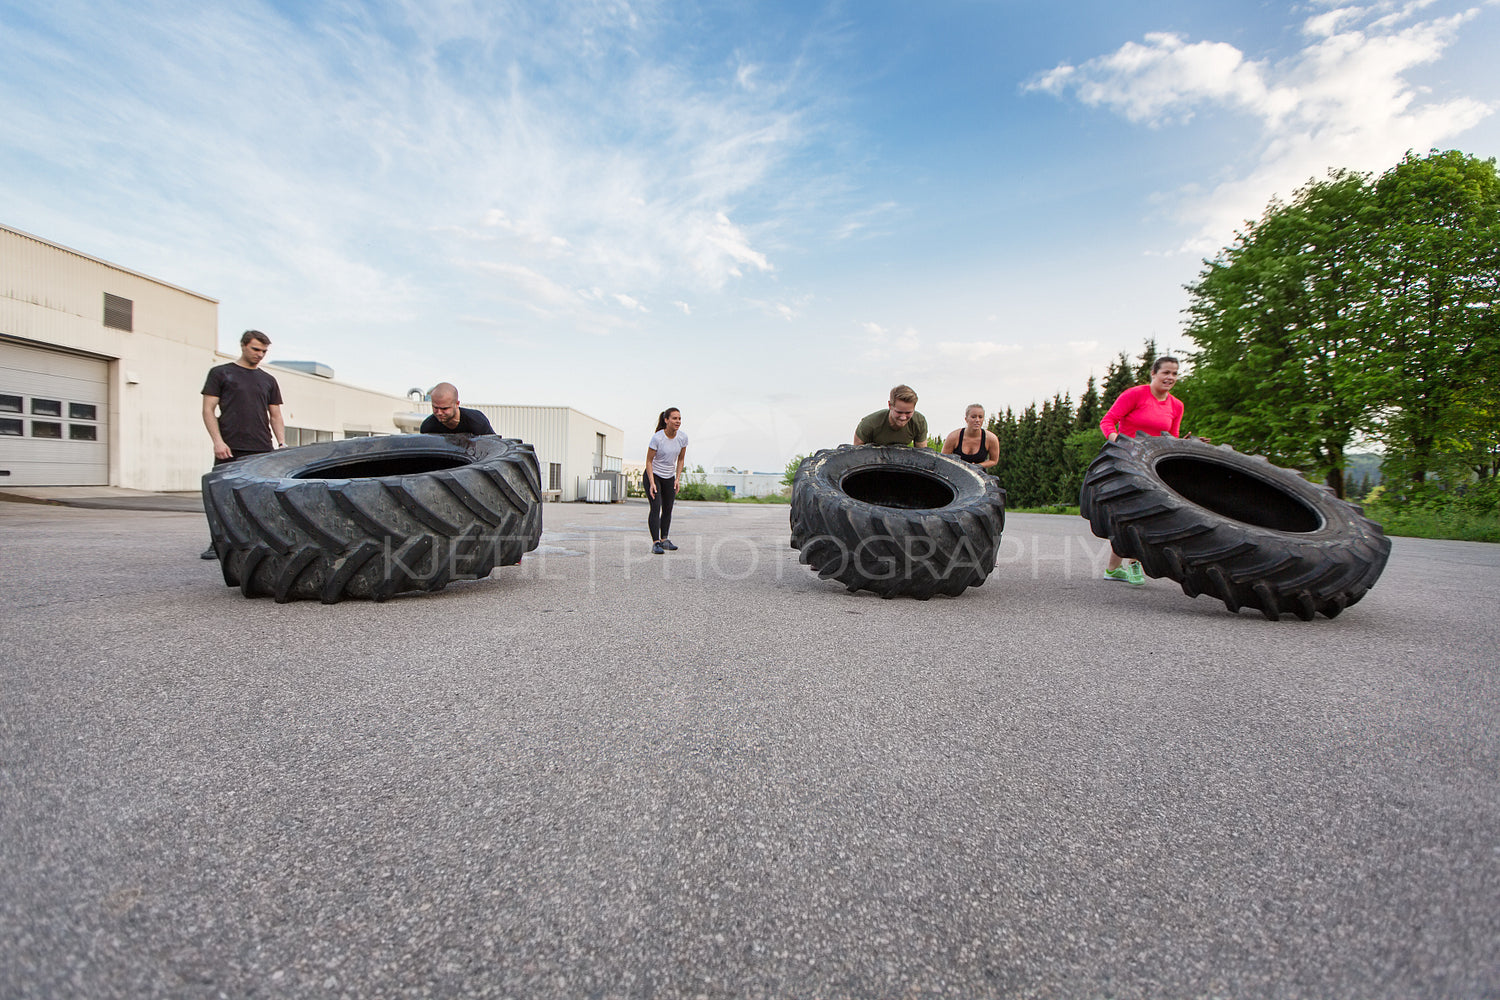 Fitness team flipping heavy tires outdoor